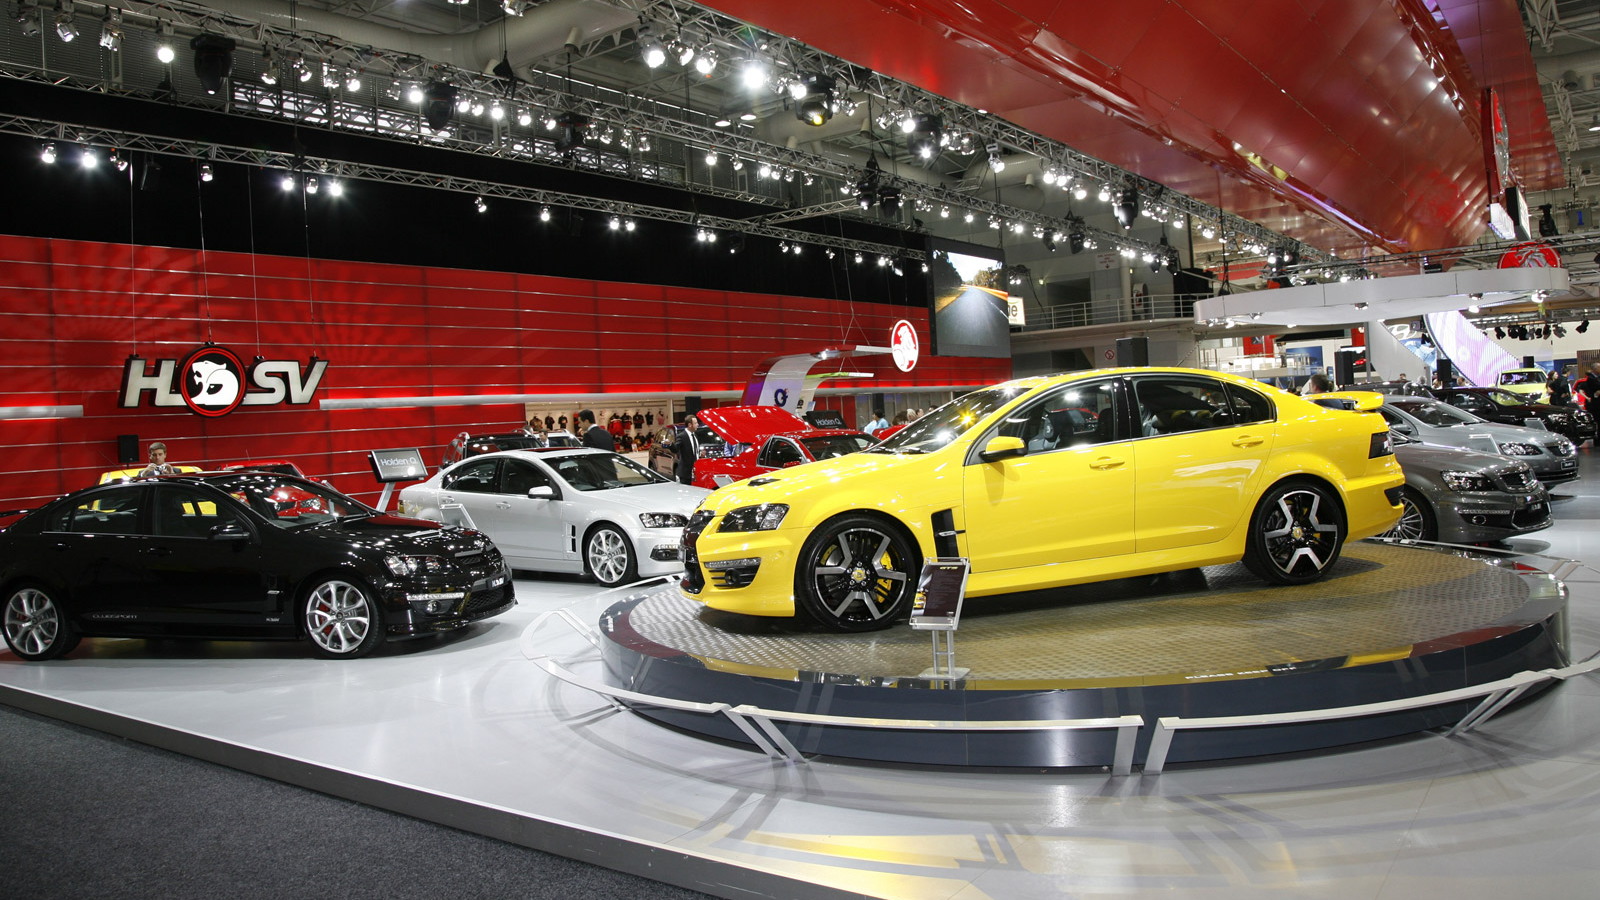 HSV stand at the 2010 Australian Motor Show